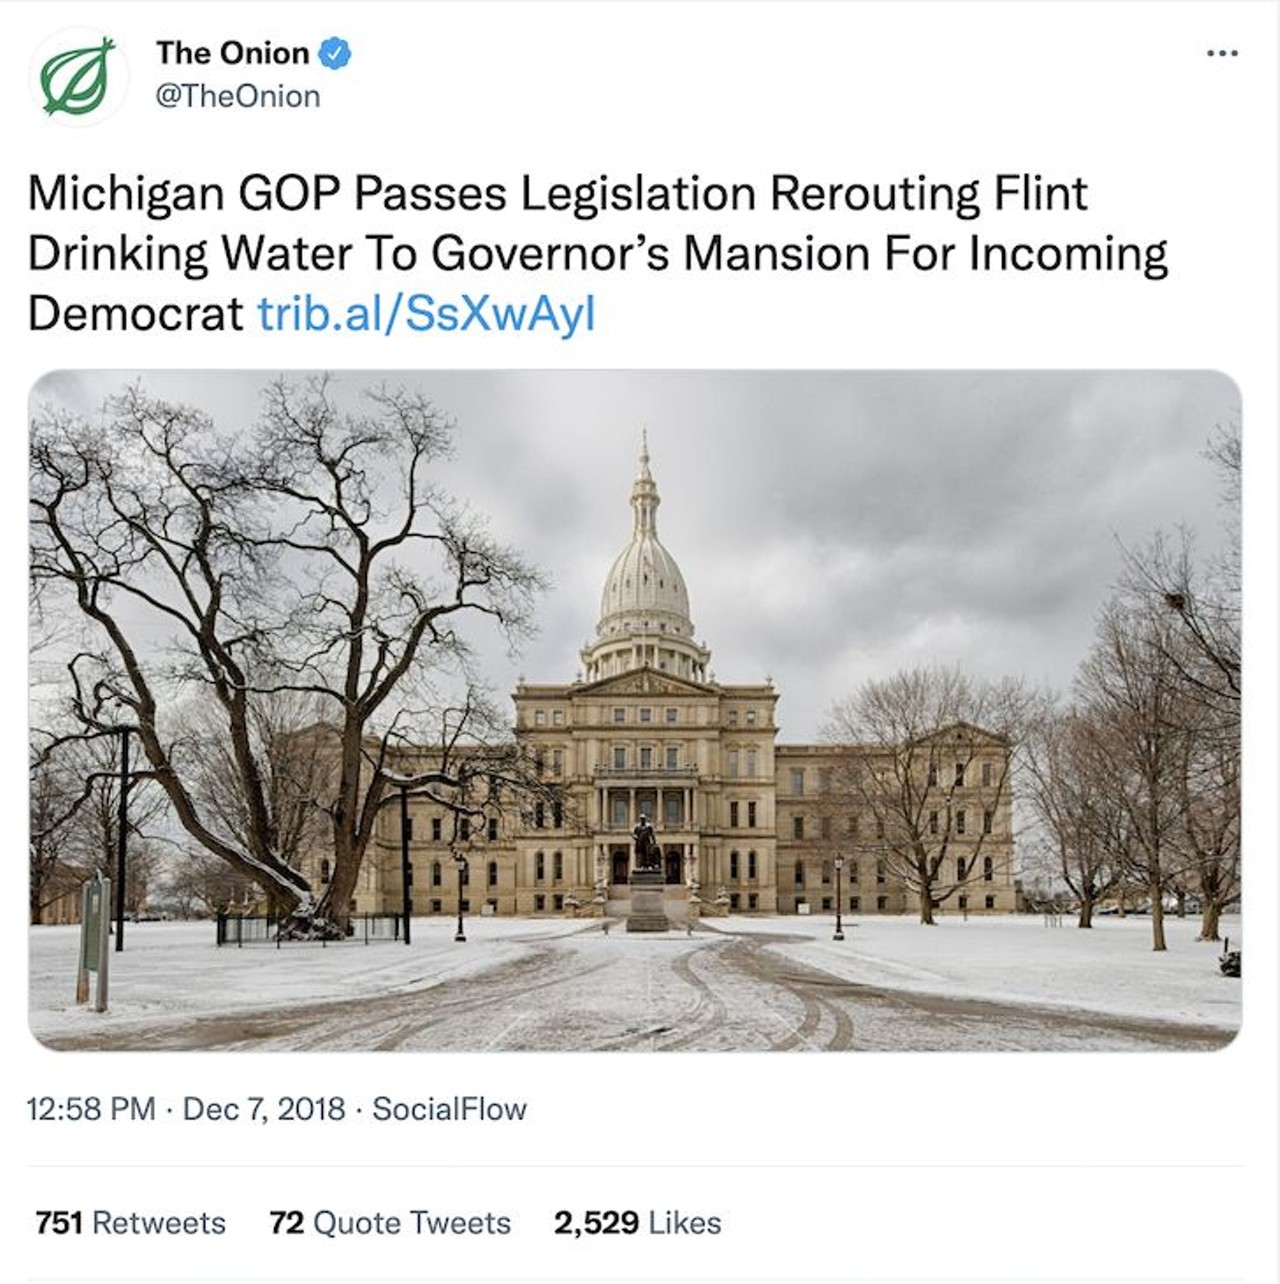 Michigan GOP Passes Legislation Rerouting Flint Drinking Water To Governor&#146;s Mansion For Incoming Democrat
Following the election of Democrat Gretchen Whitmer as Michigan governor, Michigan&#146;s GOP passes legislation to reroute water from the Flint water crisis to the Governor's house.